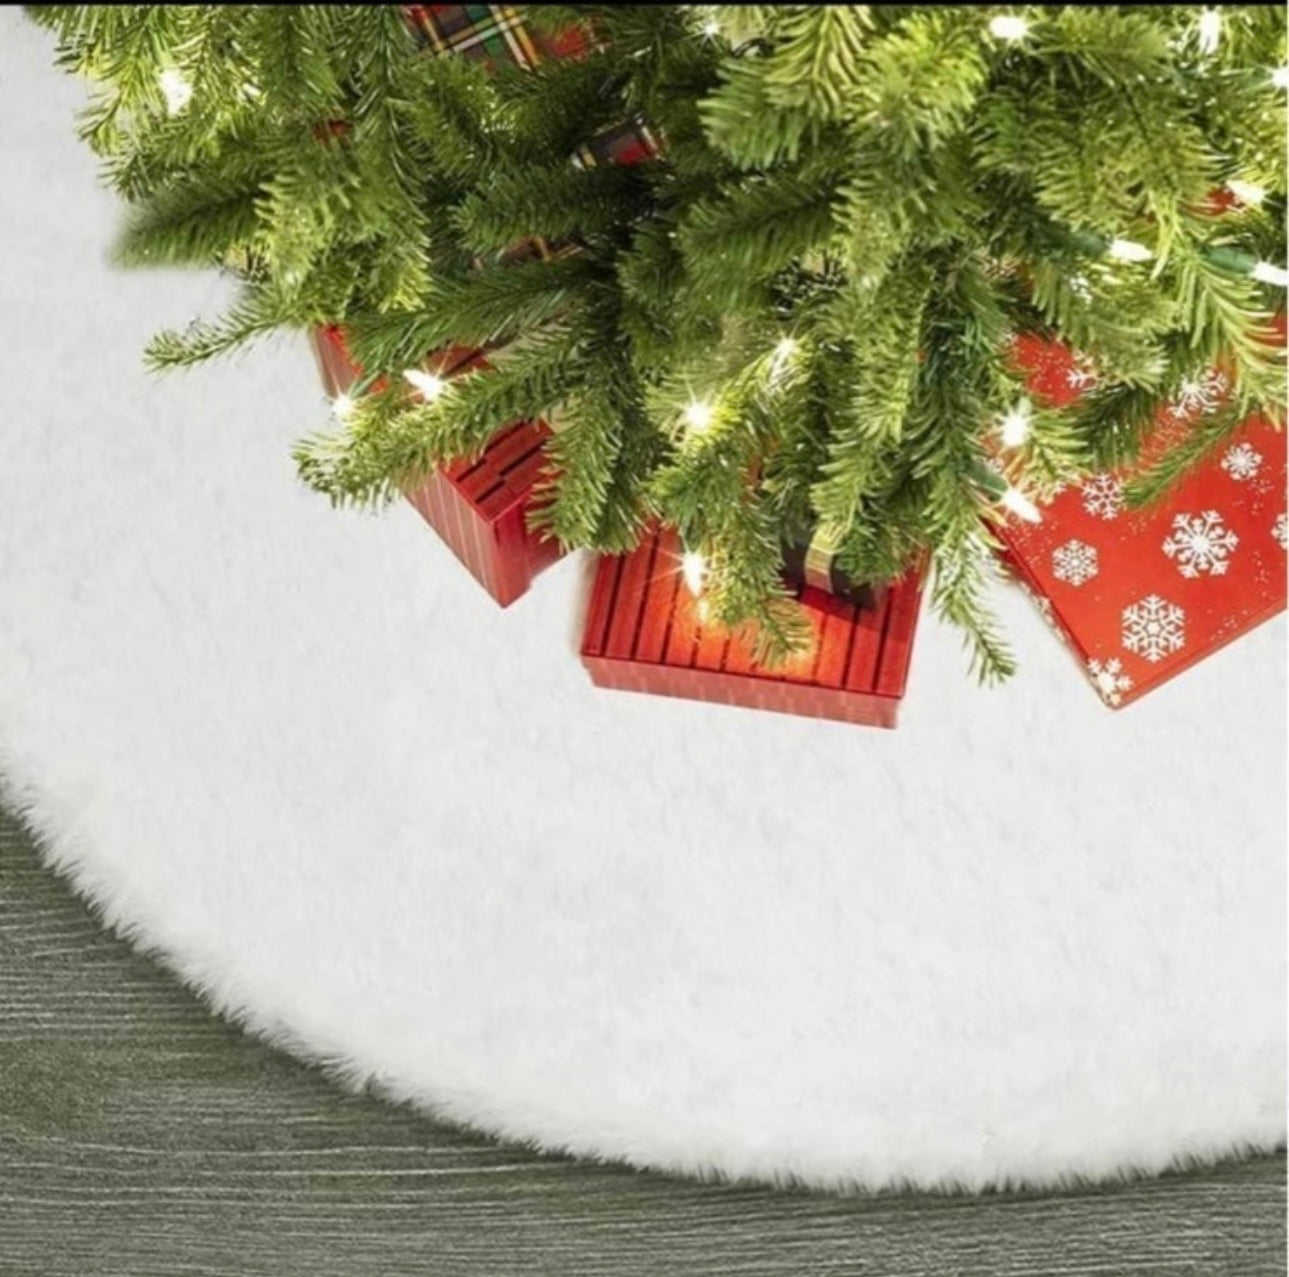 Christmas Tree Skirt 48 inch Large Snowy White Luxury Faux Fur Holiday Party